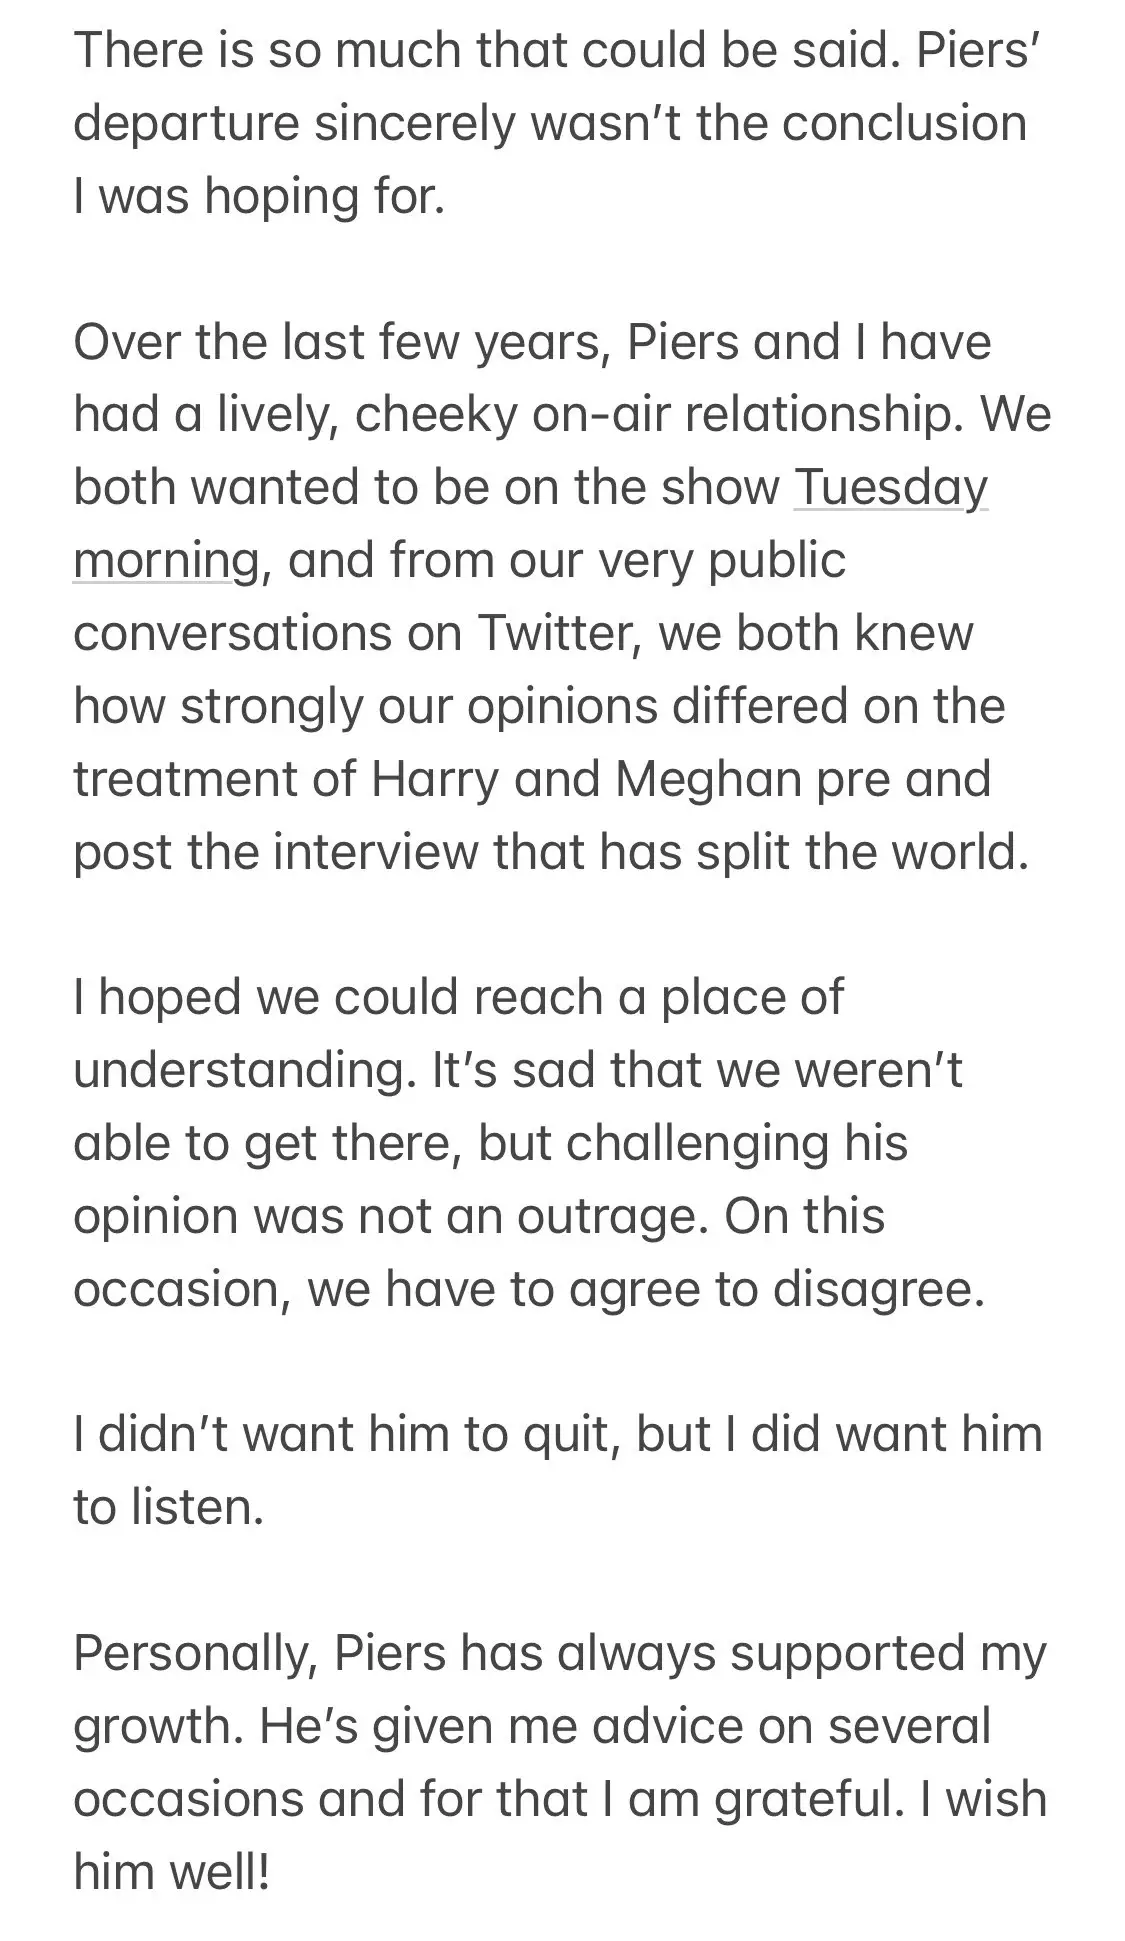 Alex issued the statement on Twitter (